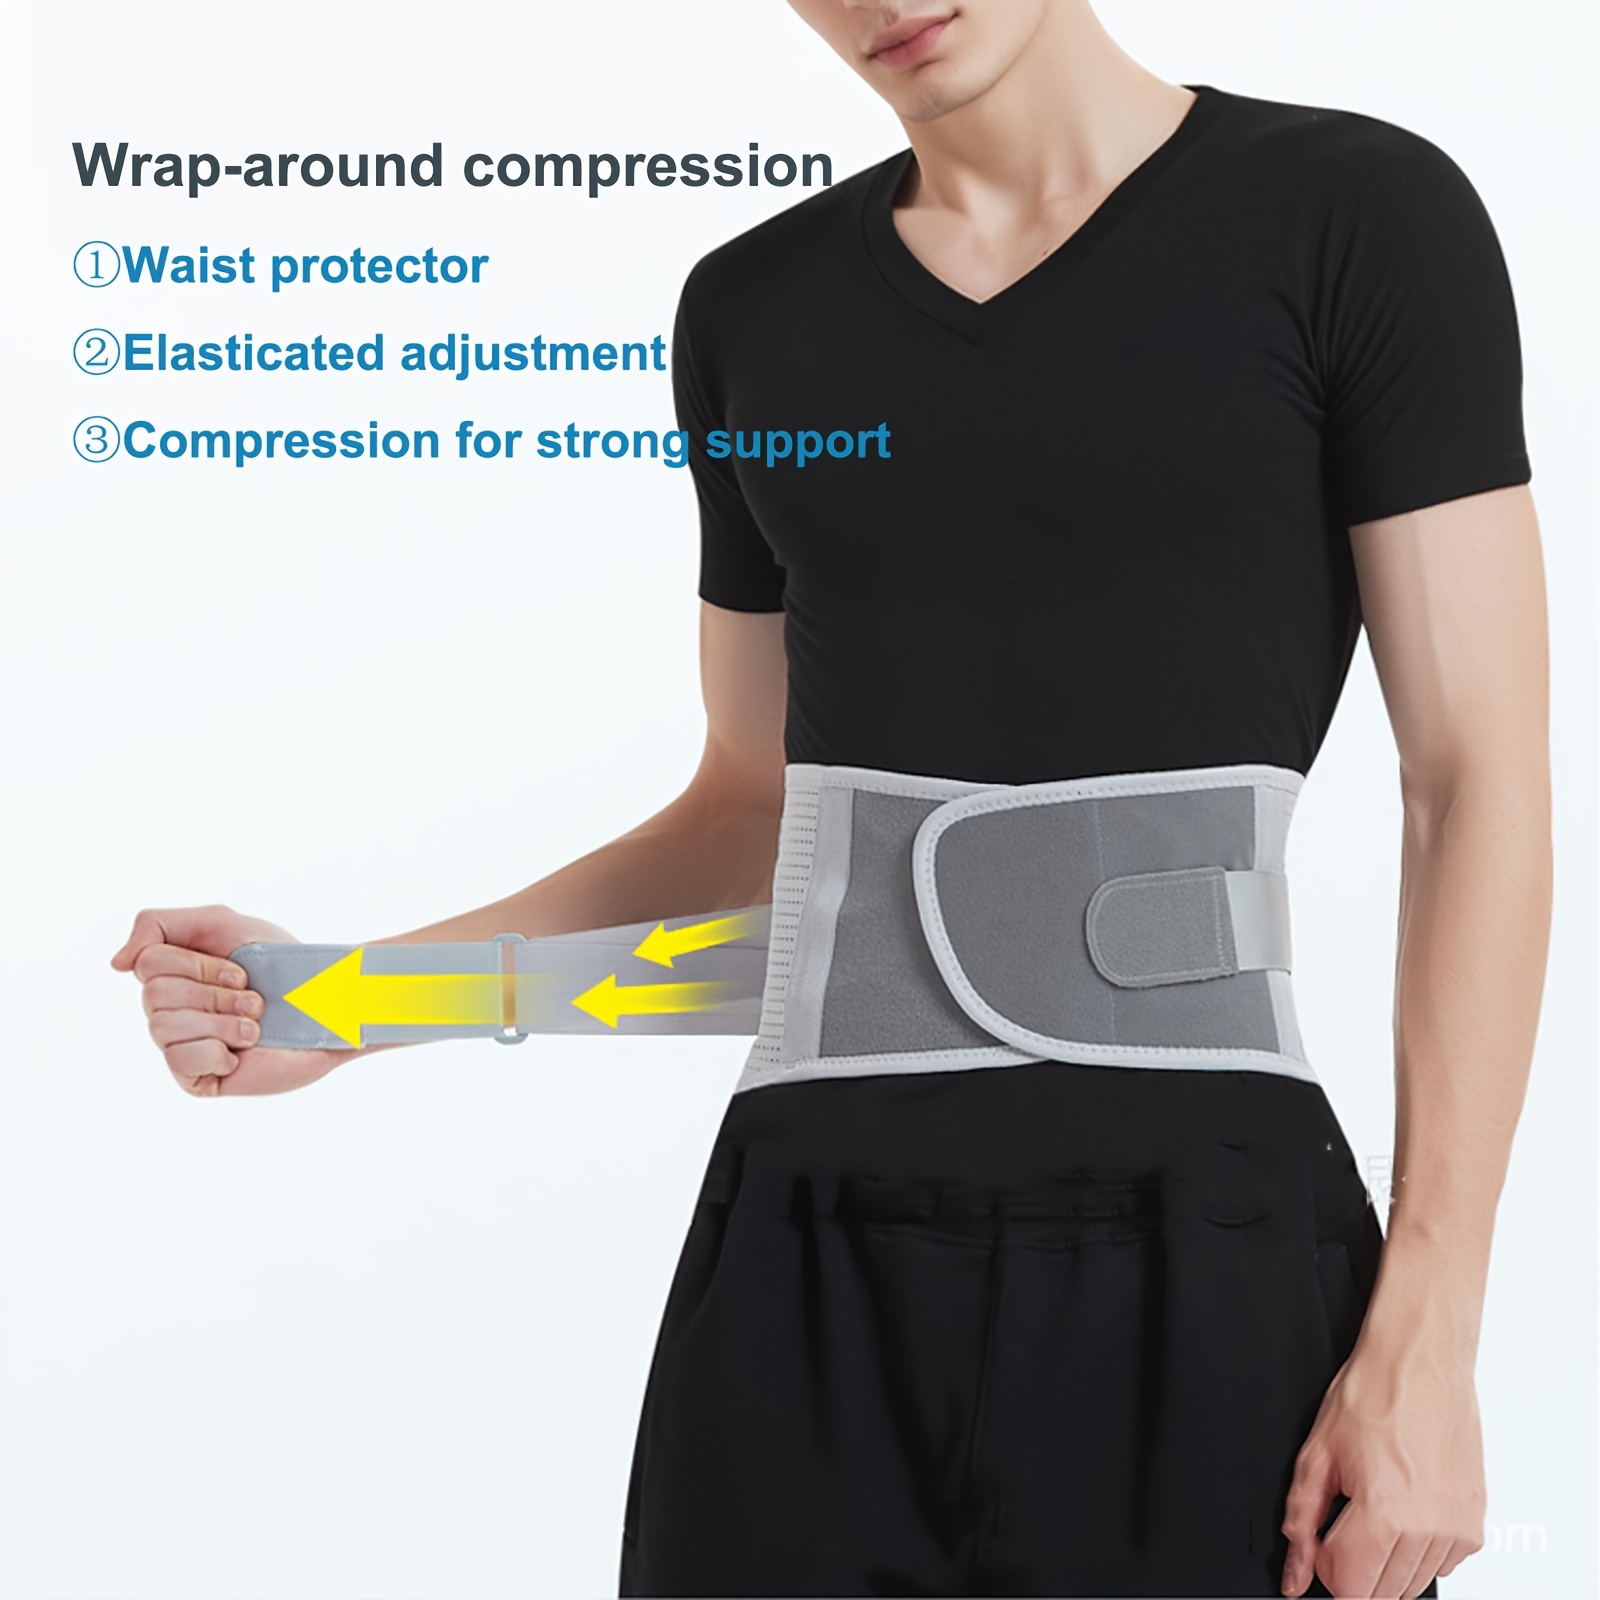 Paskyee Back Brace for Lower Back Pain Relief, Sciatica, Back Strap Support  for Men Women working out, lumbar support Belt XX-Large